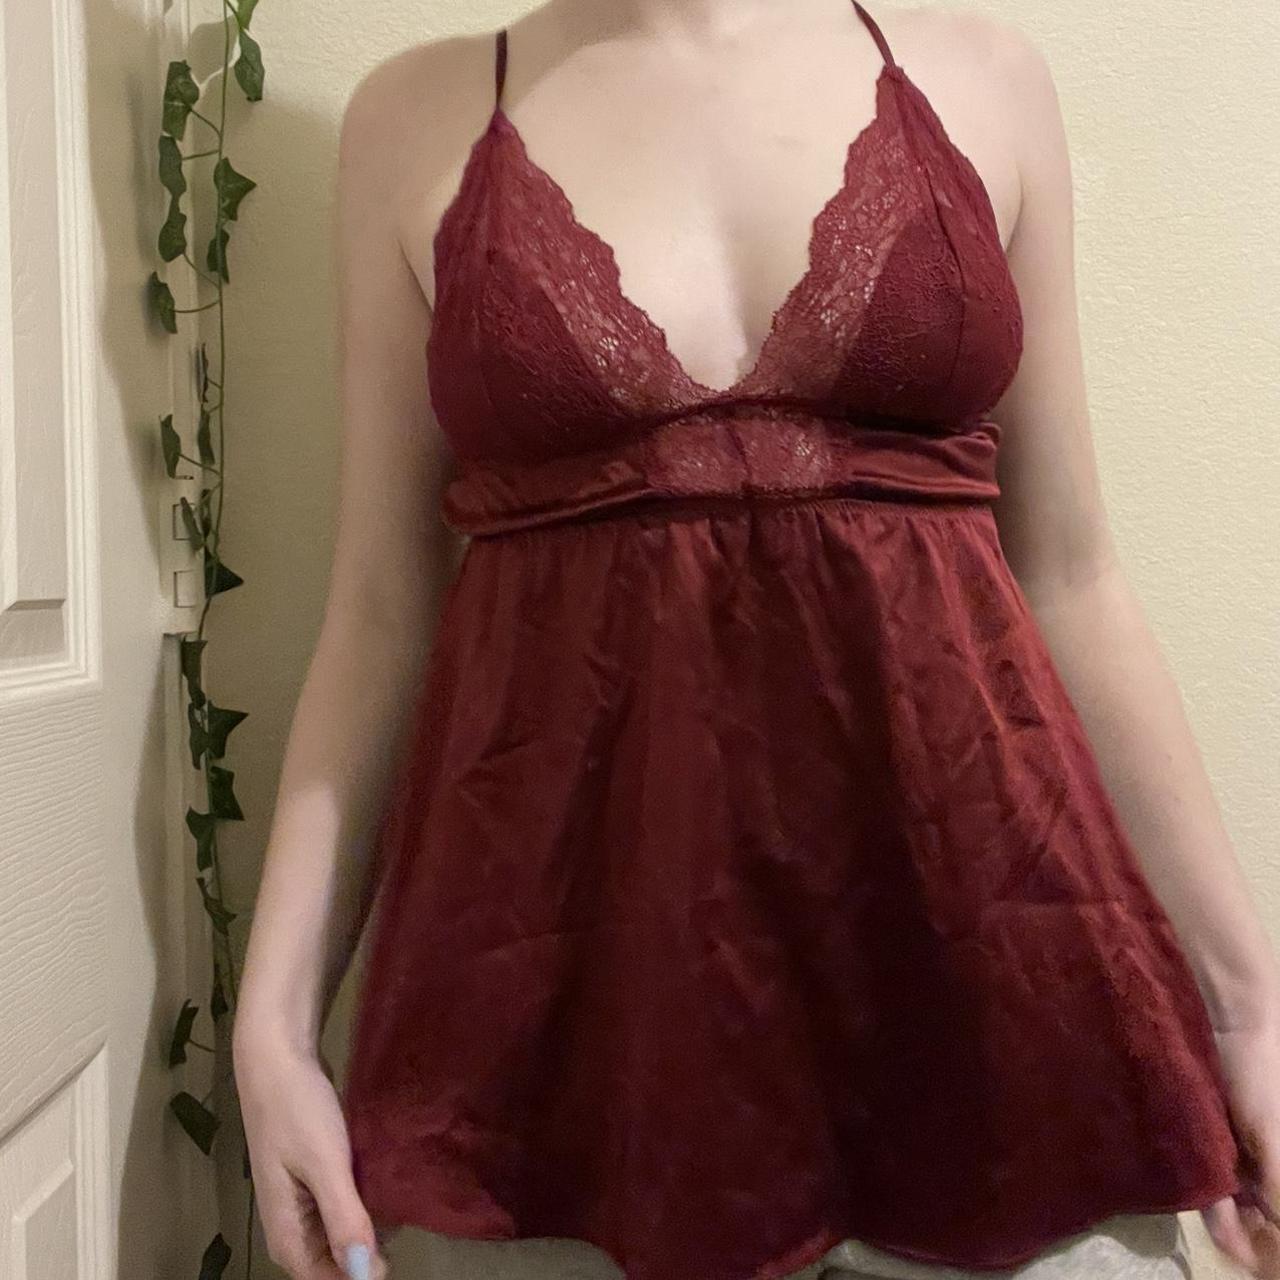 Victoria’s Secret baby doll Lingerie top RED